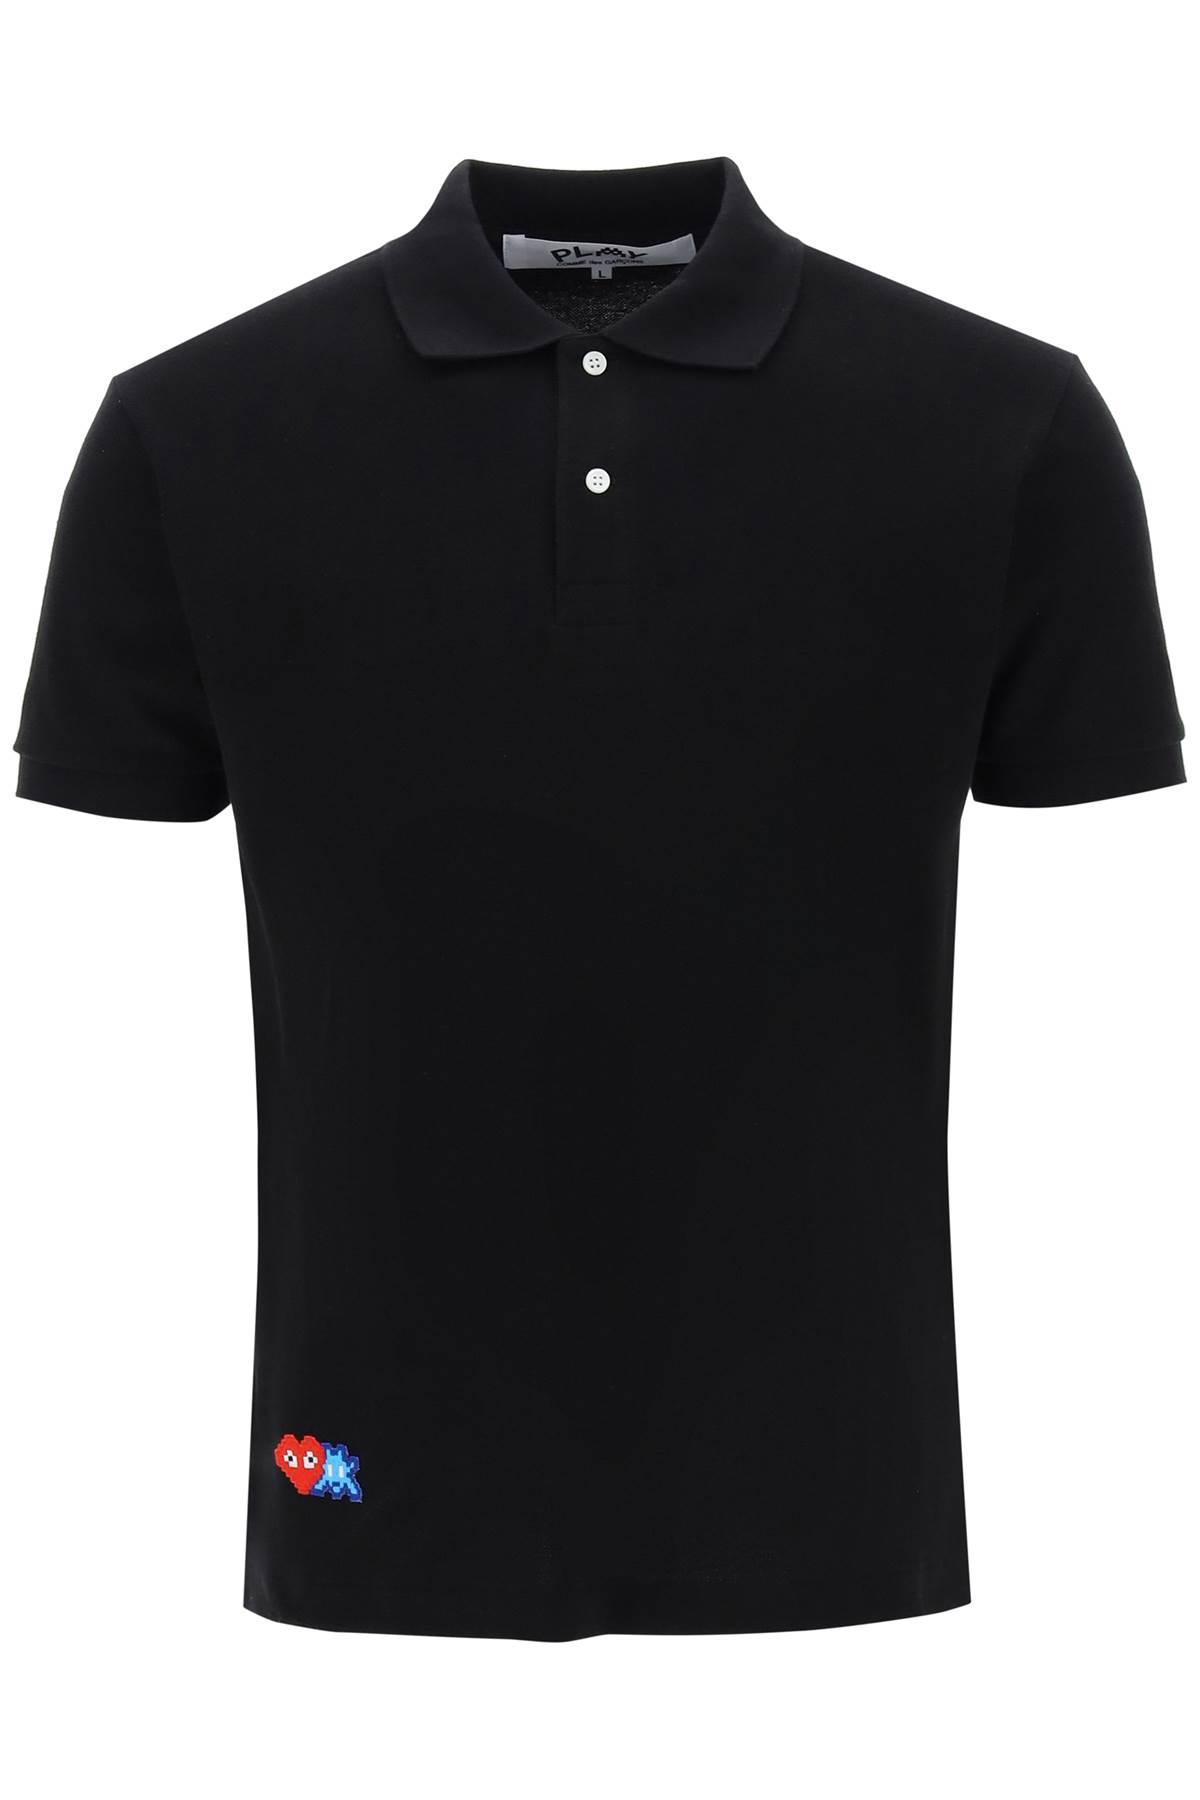 Comme des Garçons Play Polo Shirt With Graphic Embroidery